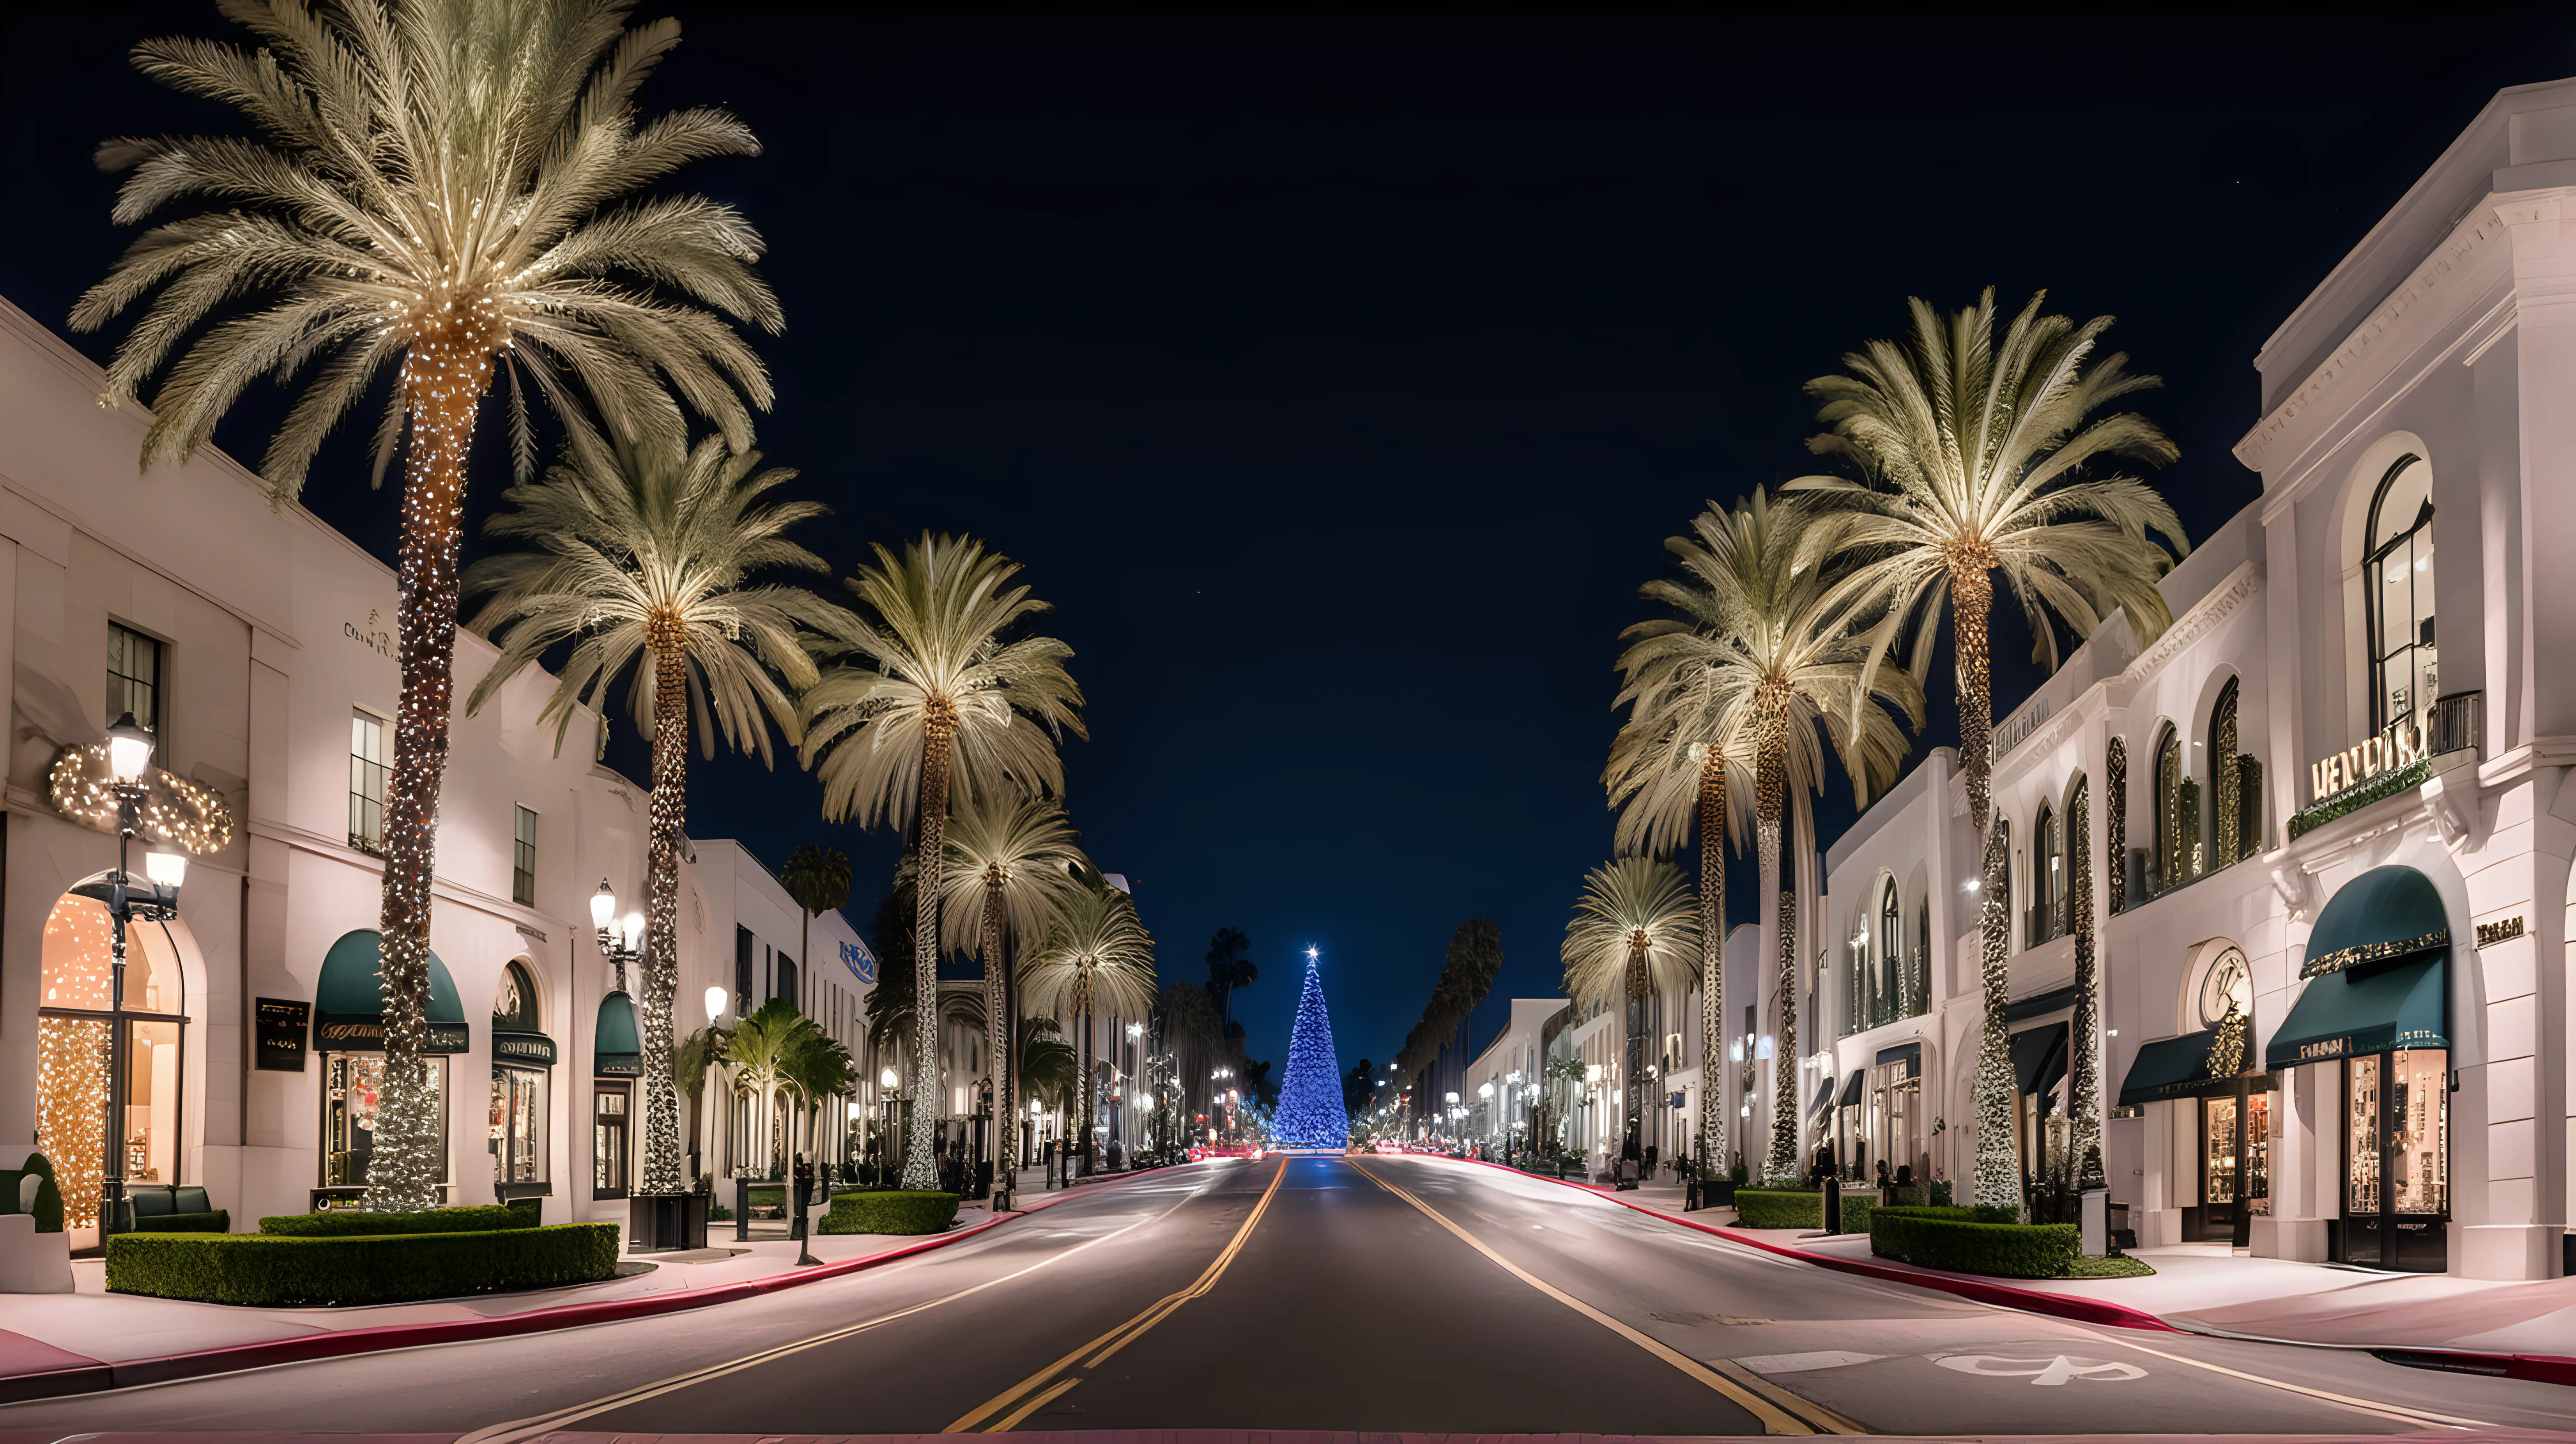 beverly hills rodeo drive at night with with palm trees and christmas holiday